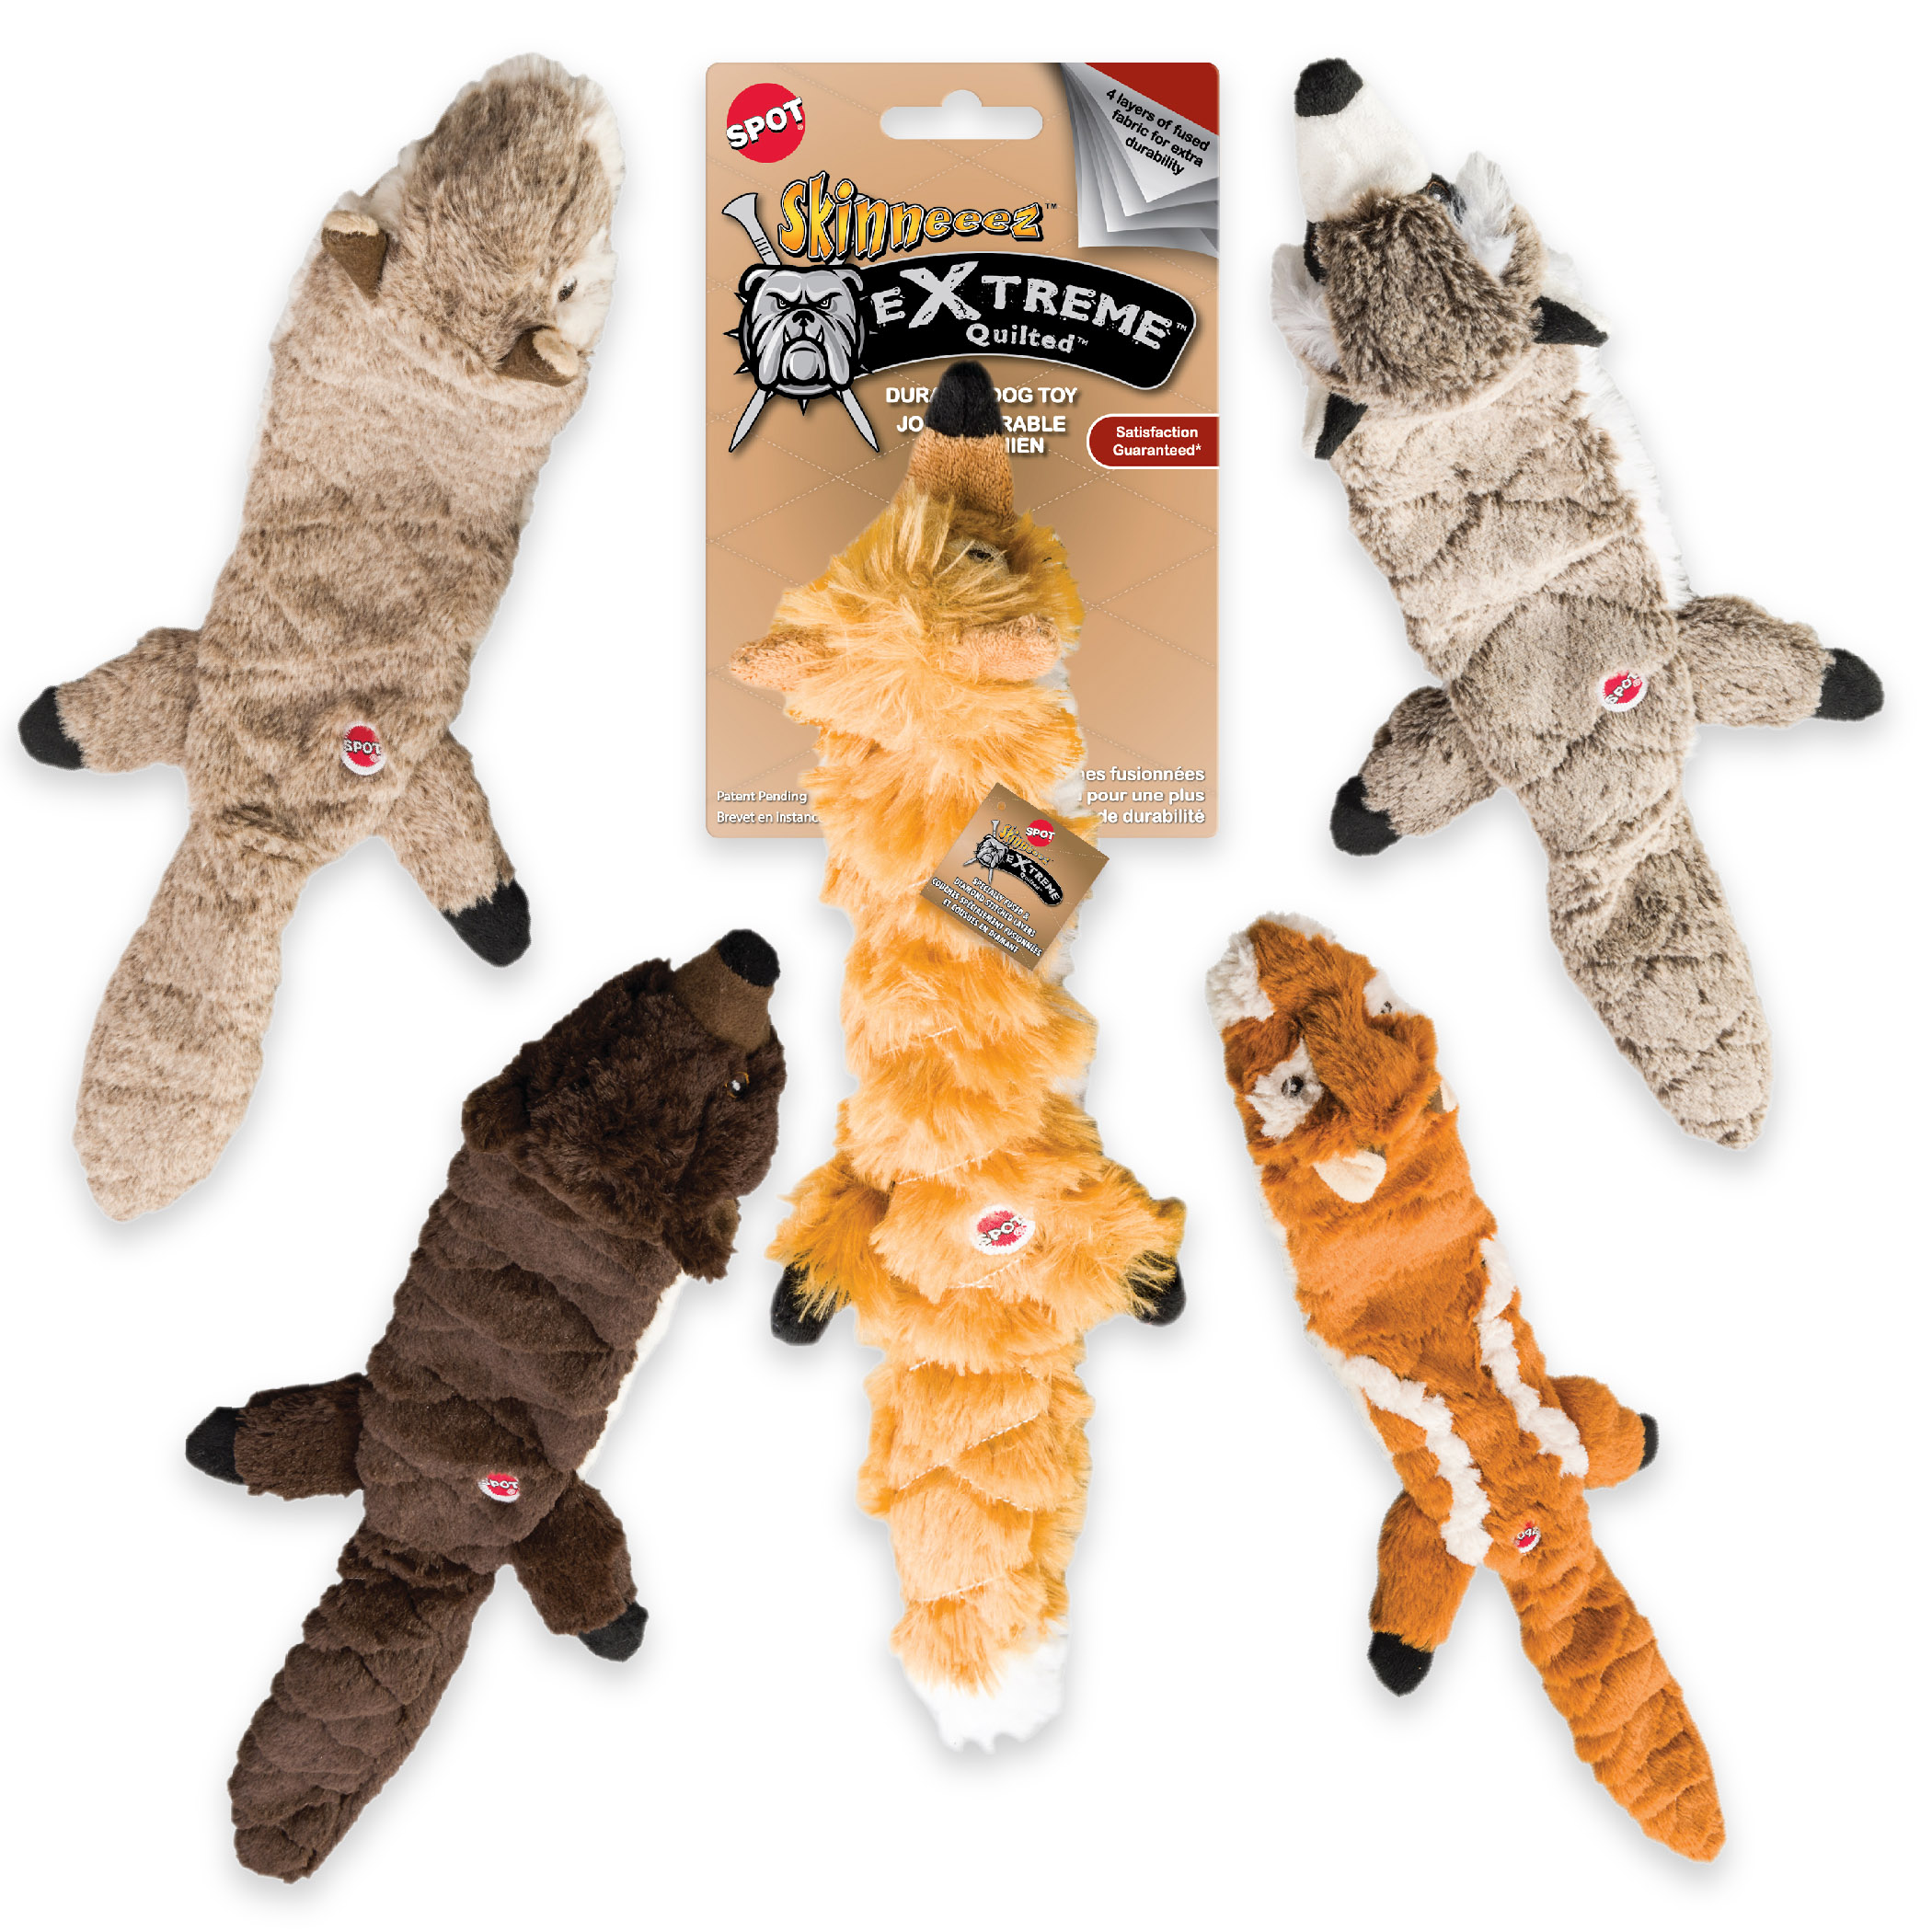 Skinneeez Extreme Quilted Dog Toys By